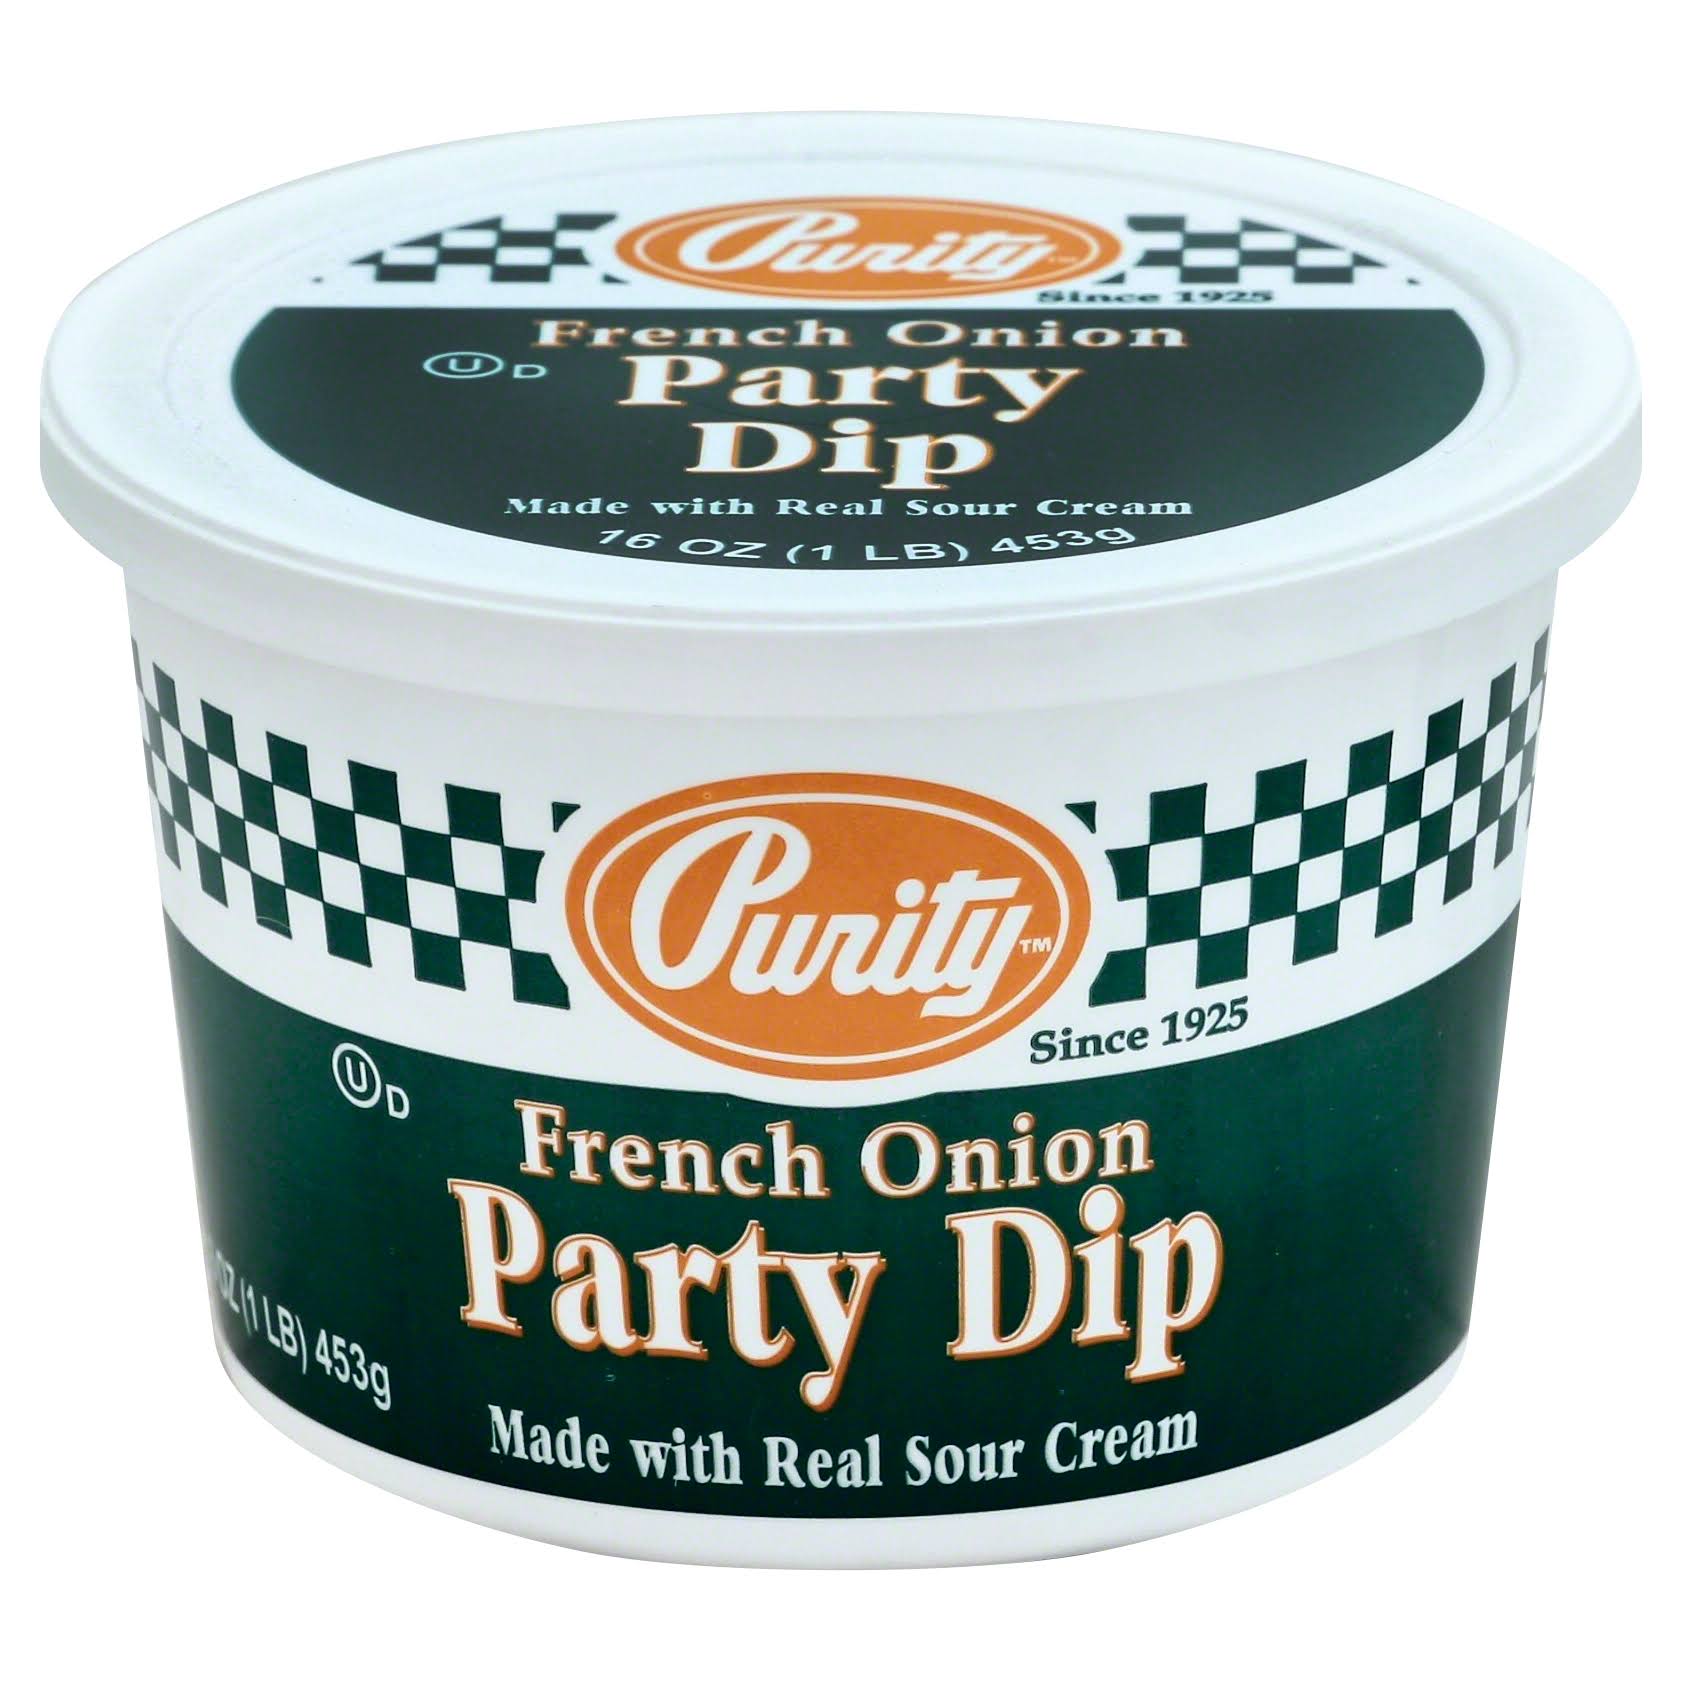 Purity Party Dip, French Onion - 16 oz